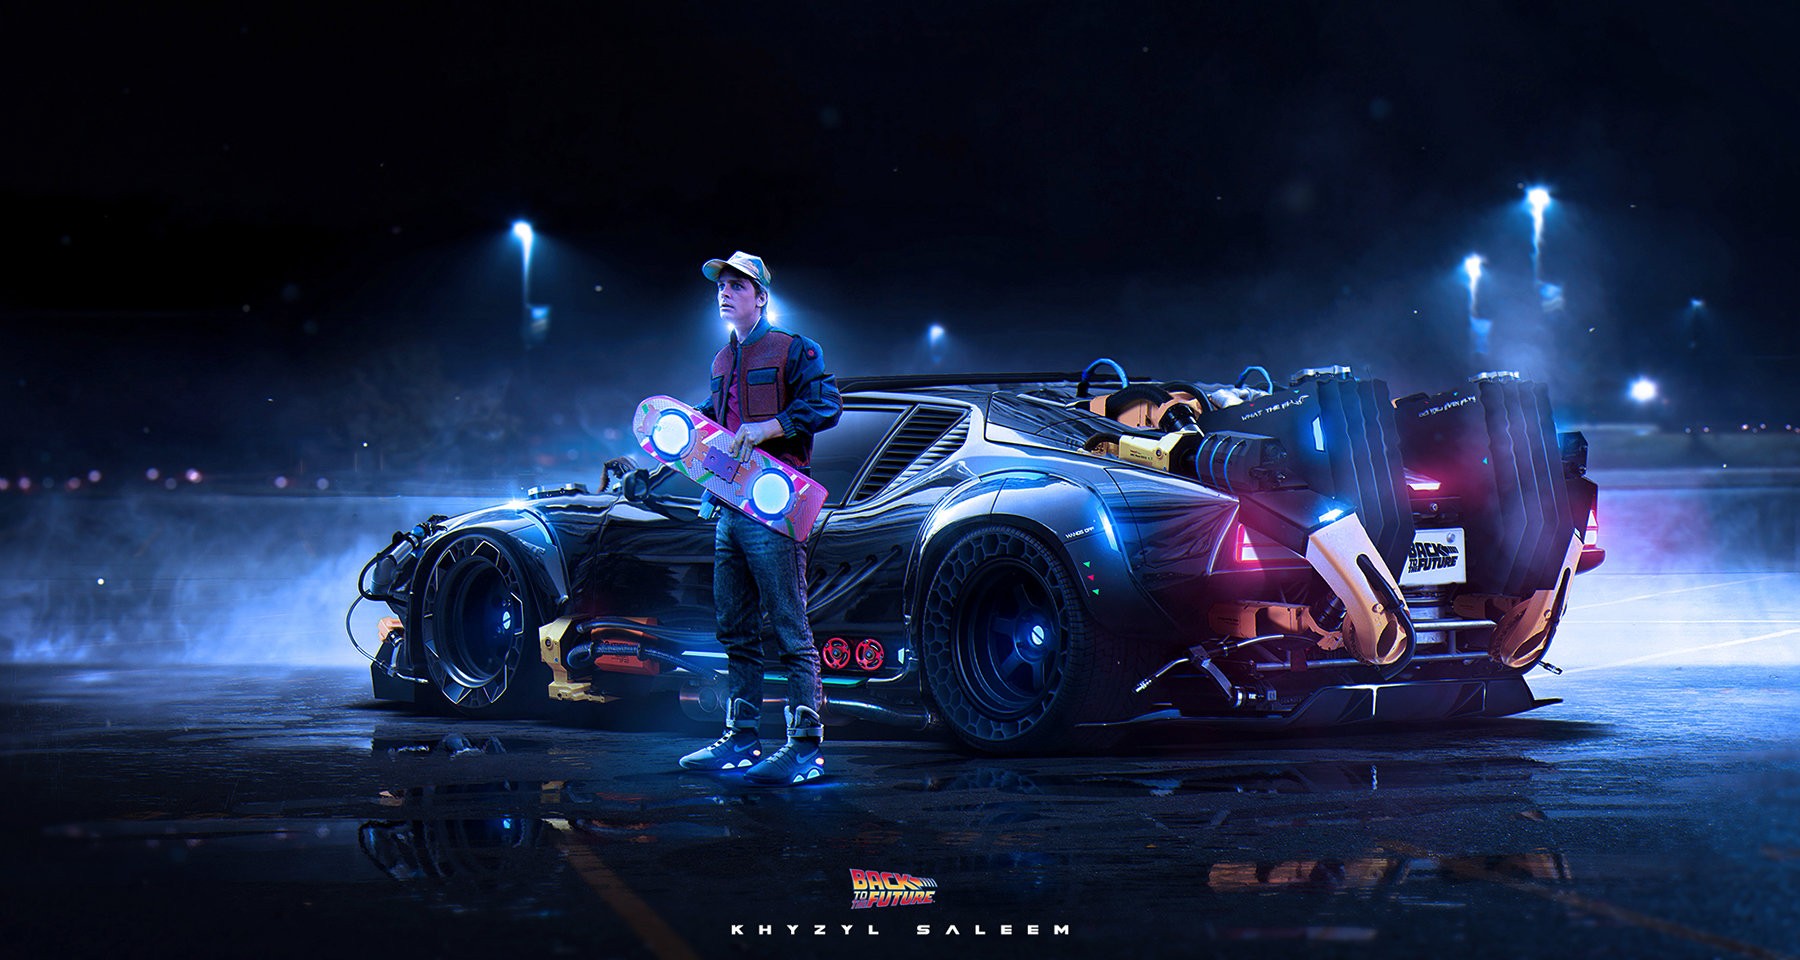 Car Hoverboard Khyzyl Saleem DMC DeLorean Marty McFly Back To The Future Ii Movies 1800x960